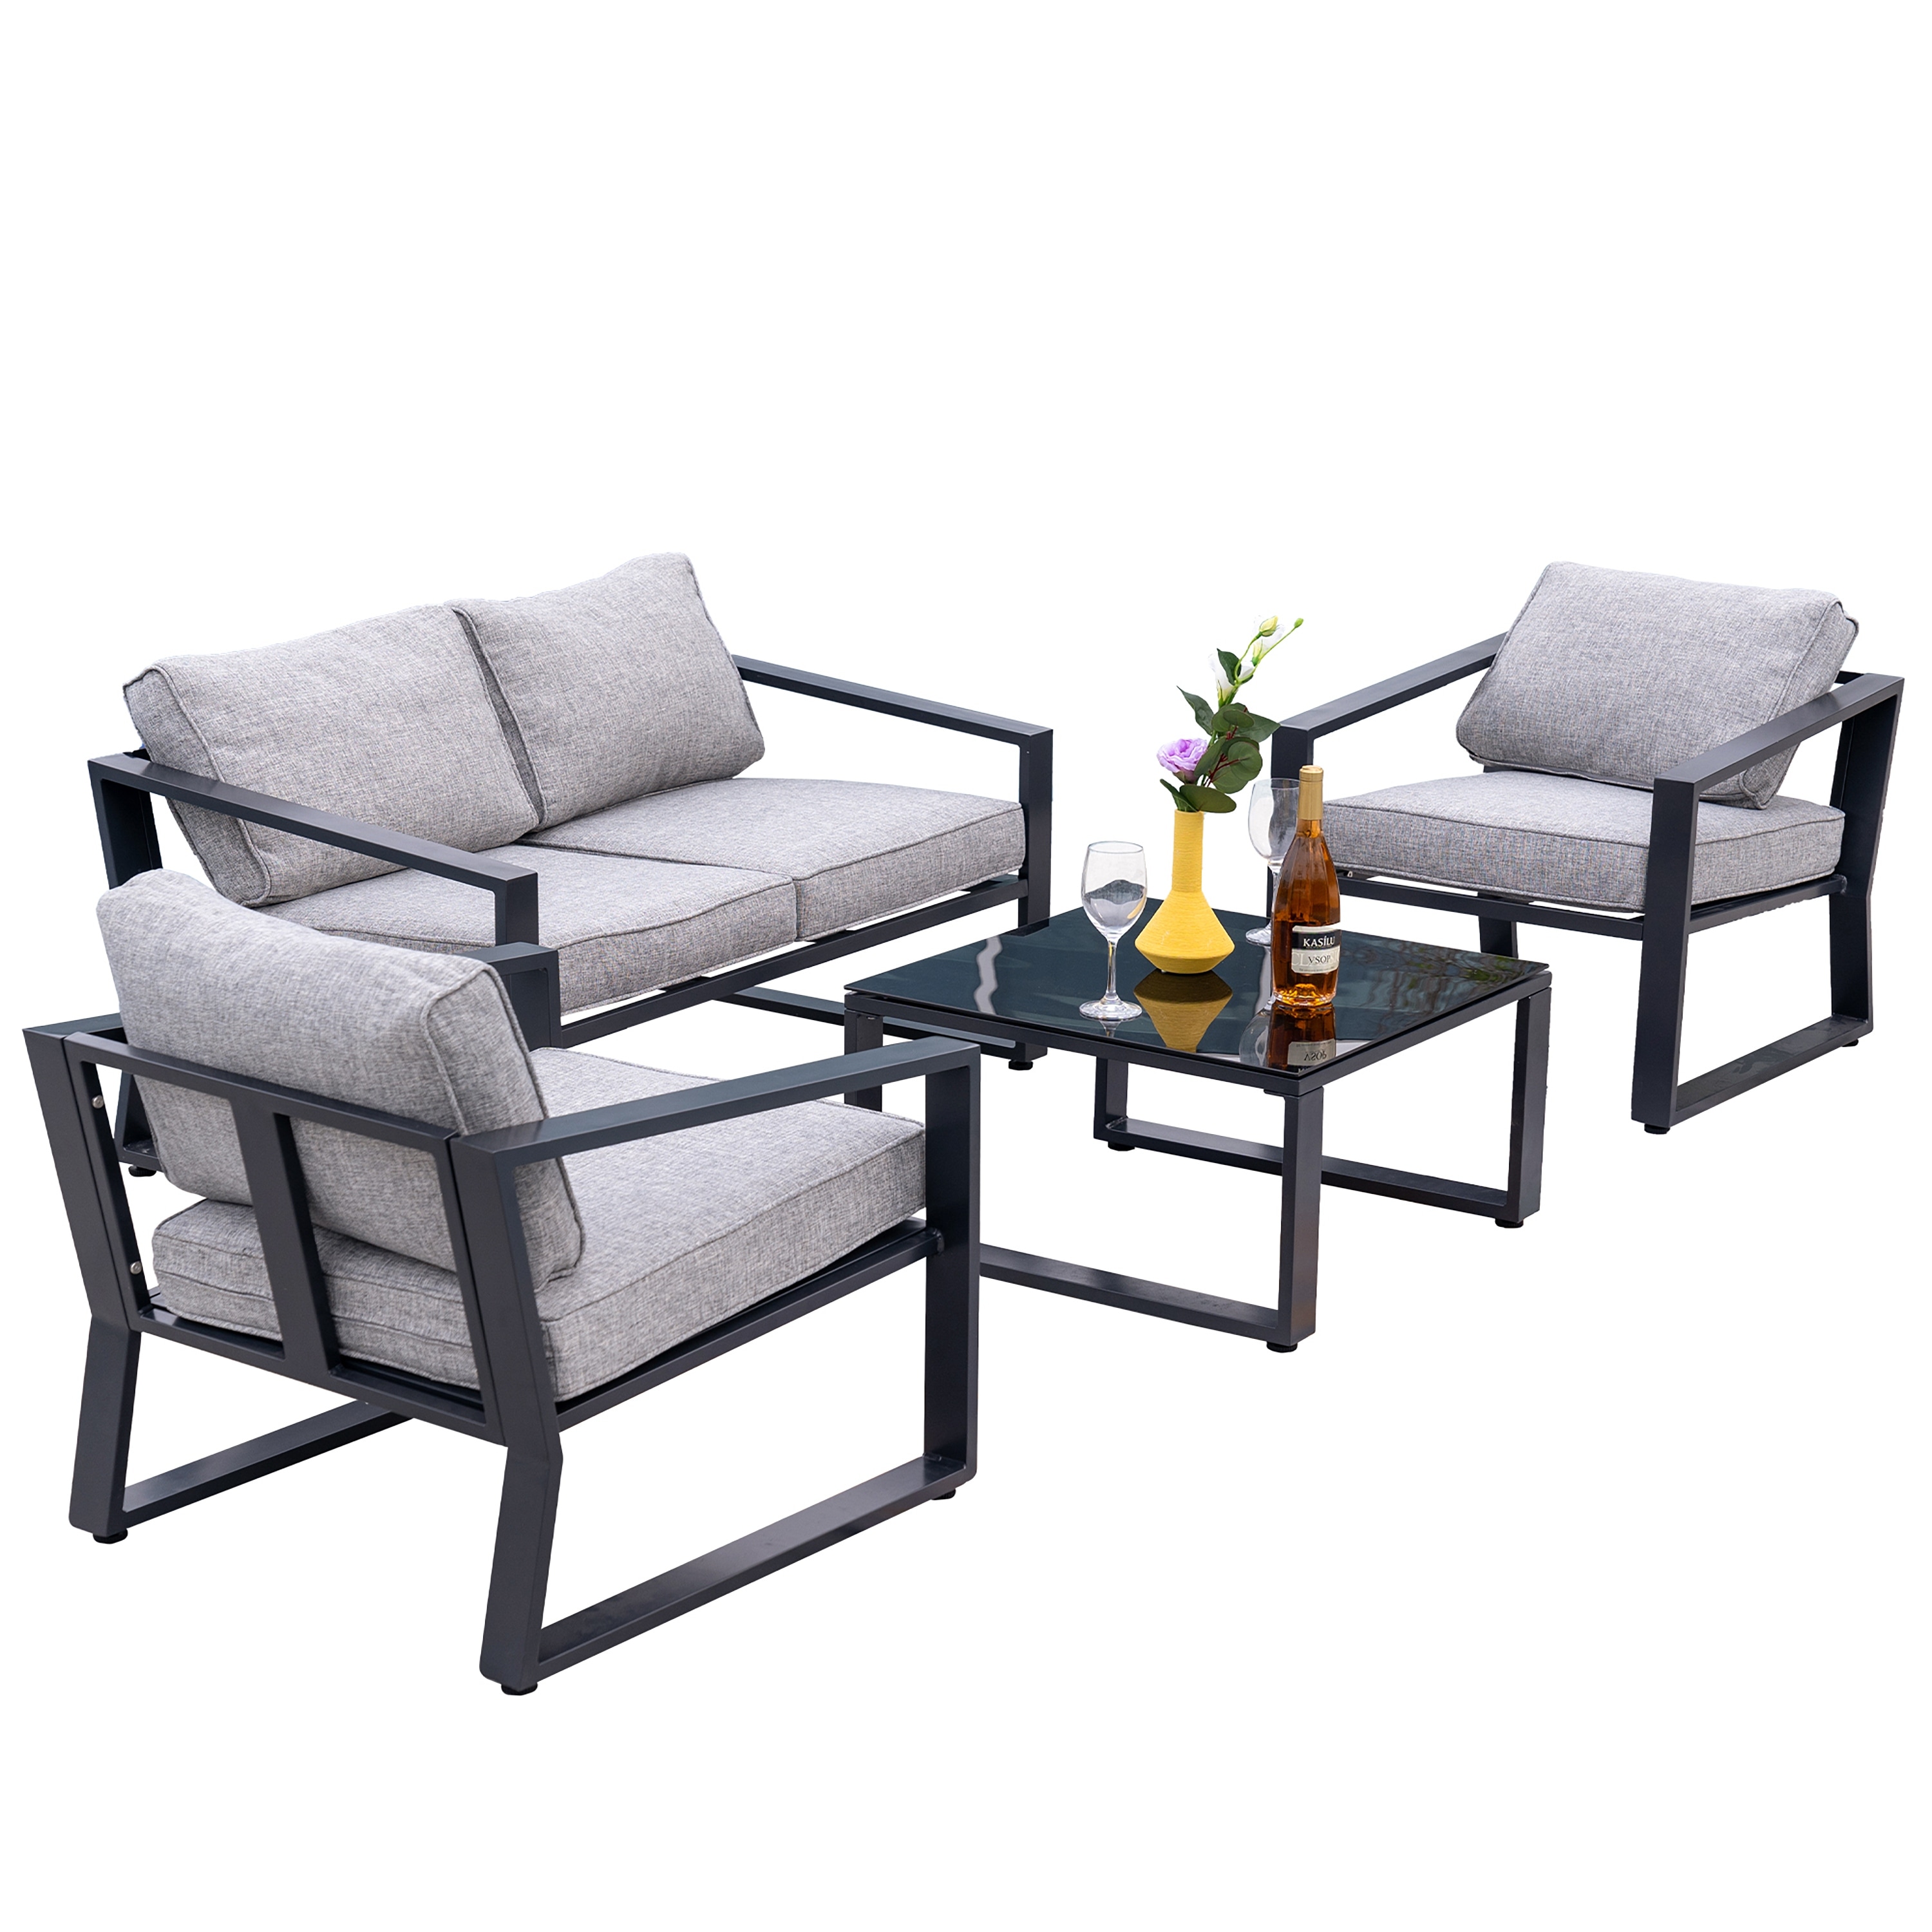 4-piece Patio Conversation Set With Coffee Table And Cushions